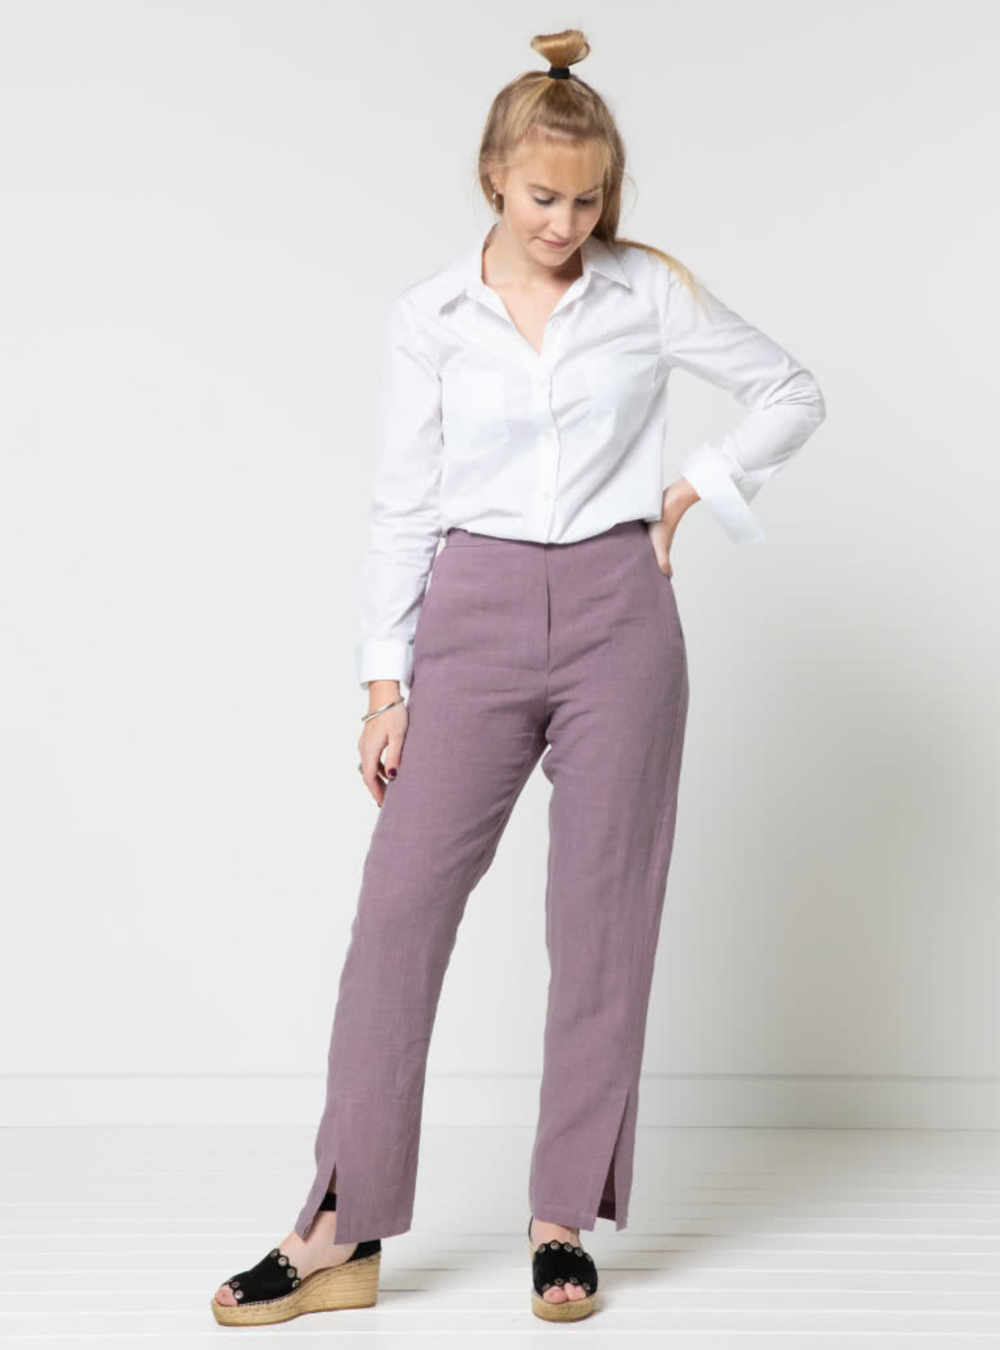 Woman wearing the Bennet Woven Pant sewing pattern from Style Arc on The Fold Line. A trouser pattern made in linen, crepe or light wool fabrics, featuring a straight leg, pull-on style, side leg splits, shaped front waistband, elastic back waistband, fau